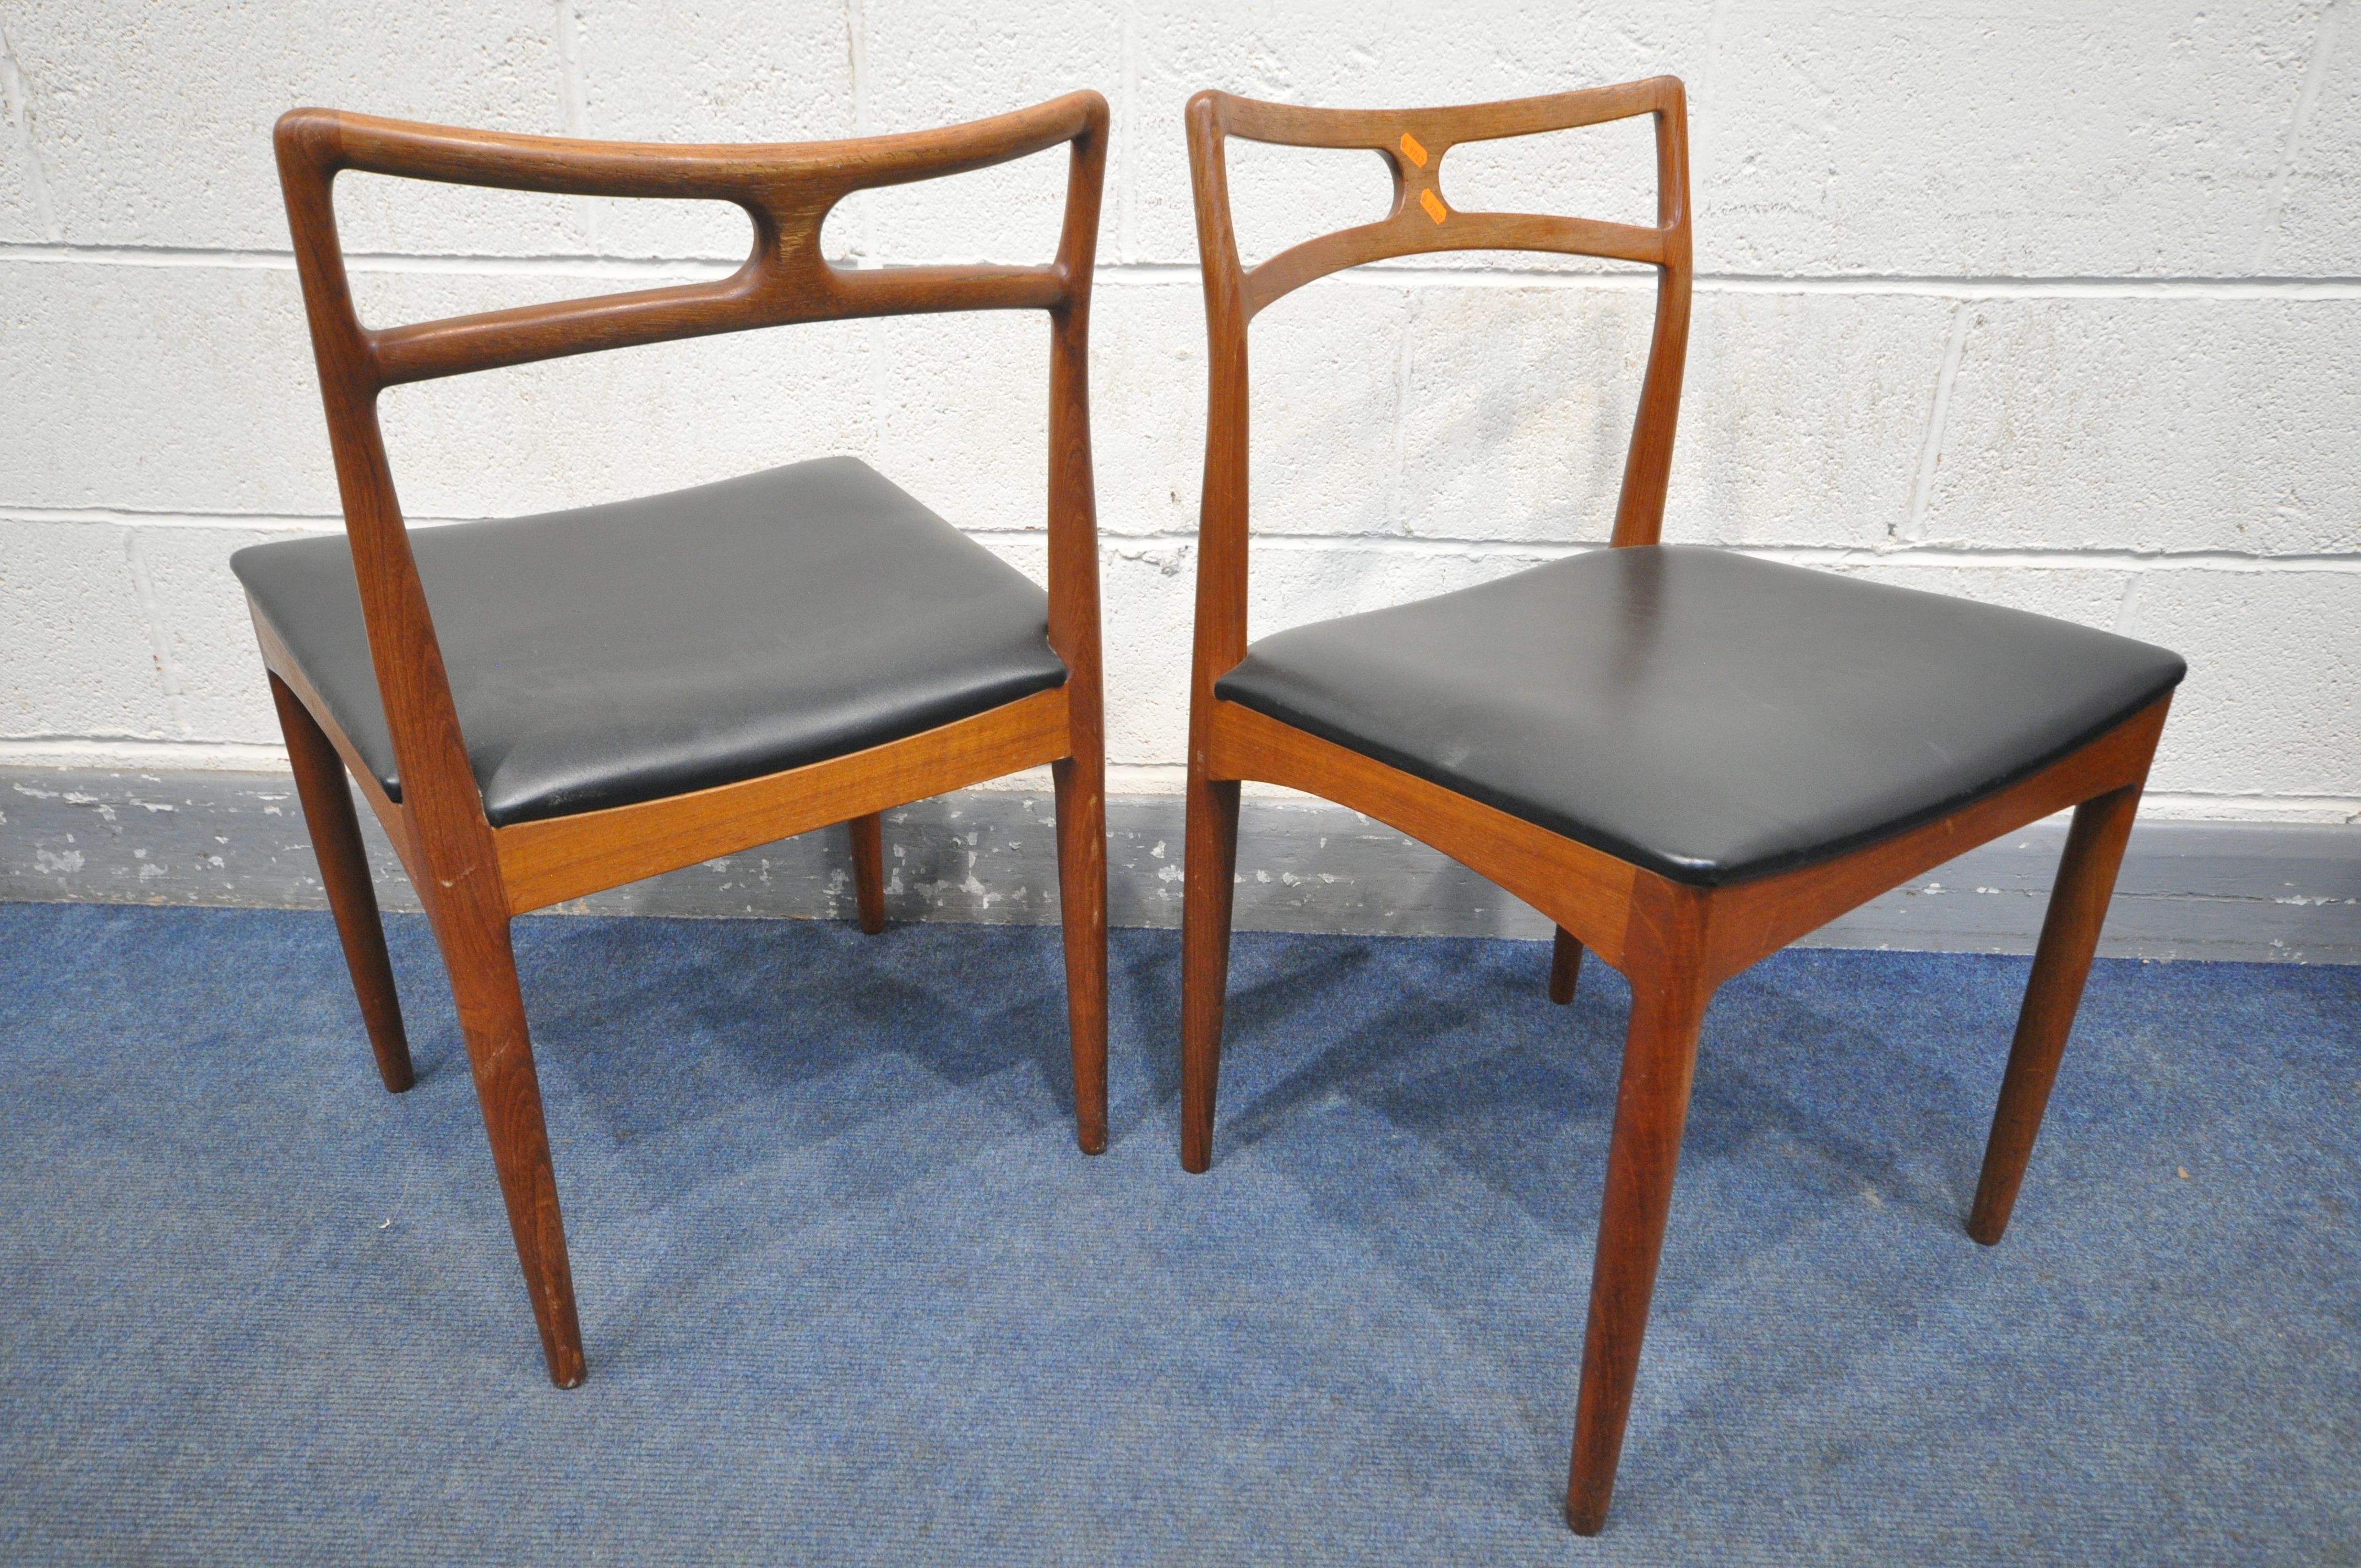 JOHANNES ANDERSEN FOR CHRISTIAN LINNEBERGS MØBELFABRIK, a set of six Danish teak dining chairs, with - Image 4 of 9